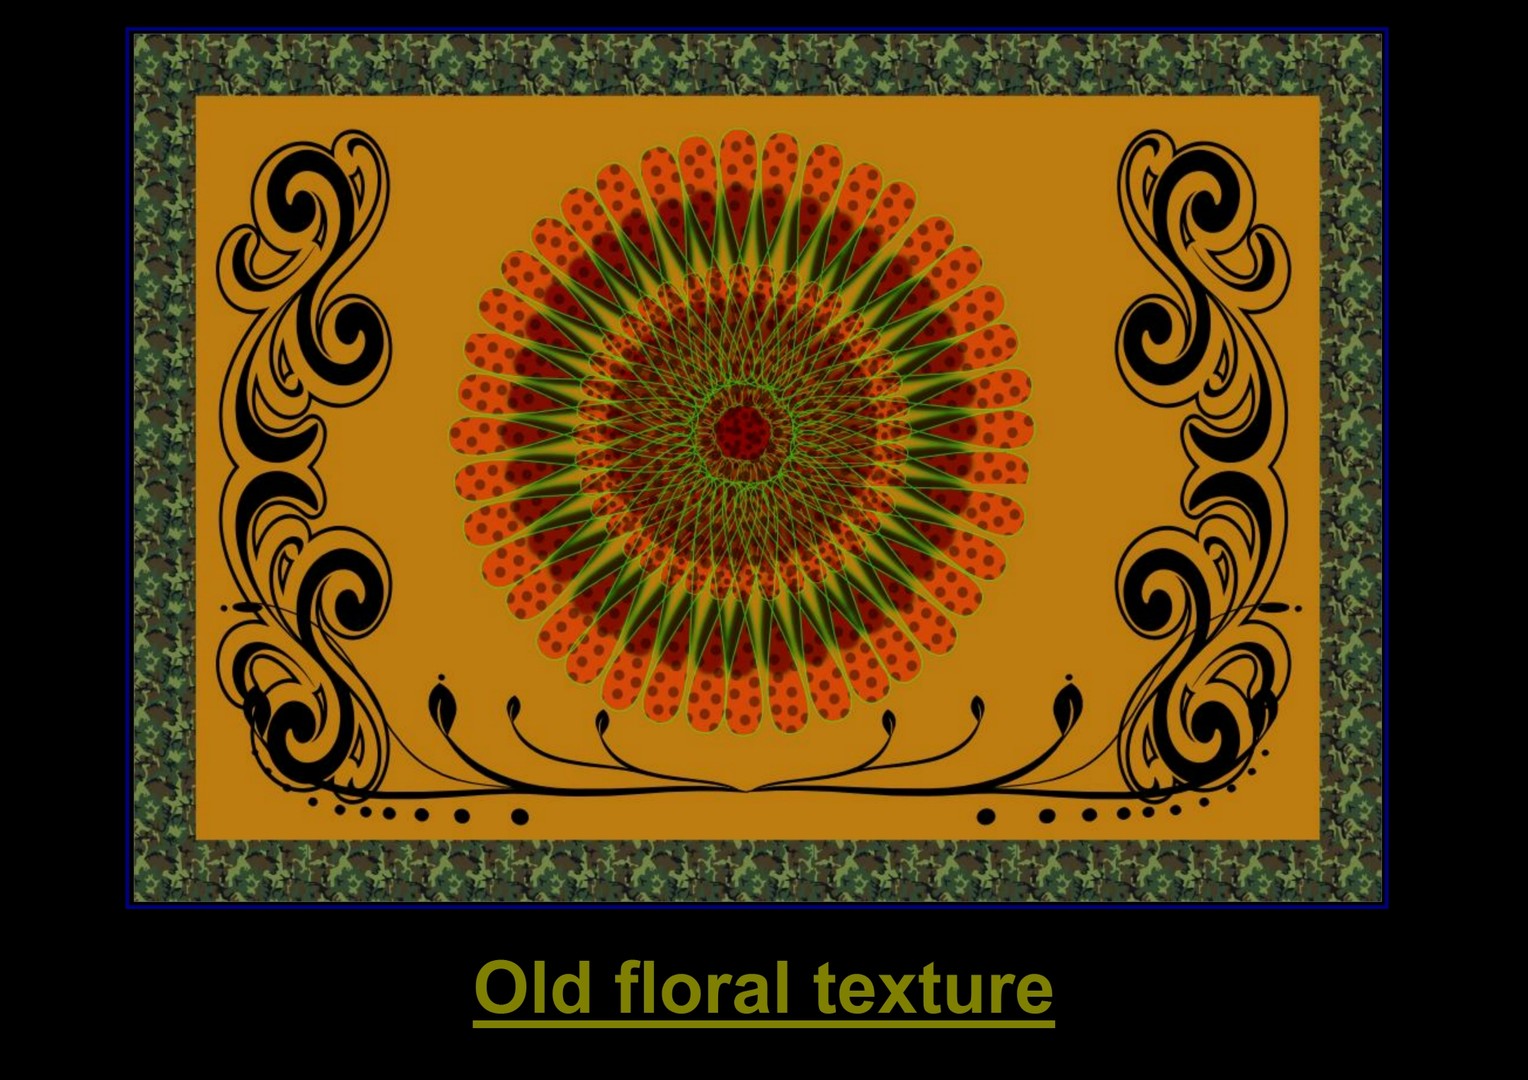 Old floral texture